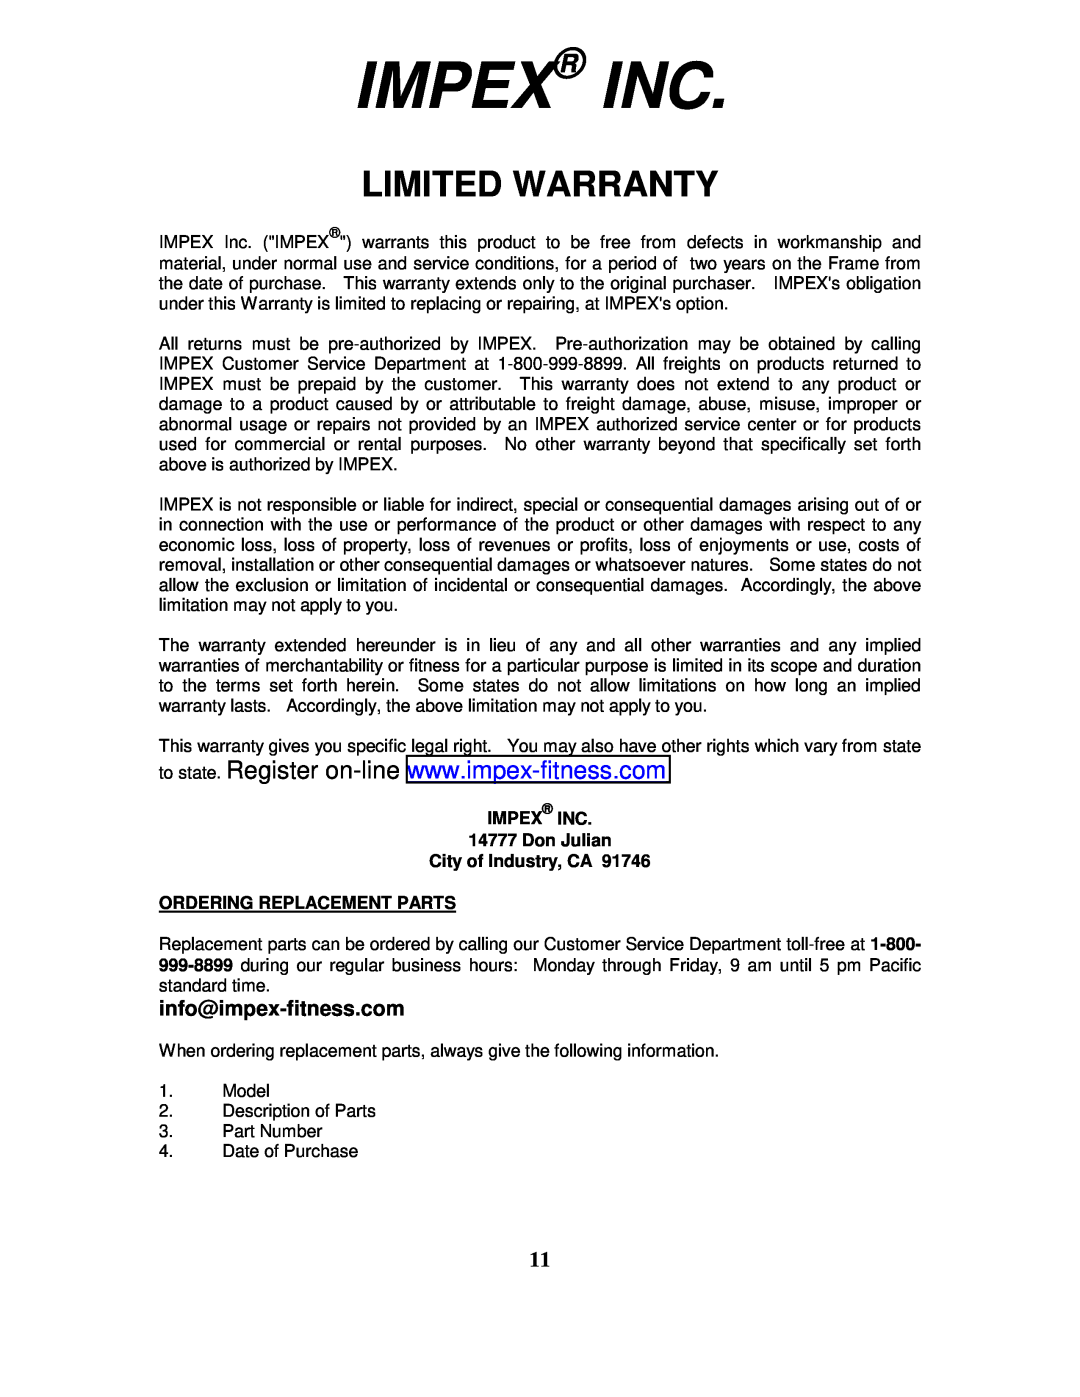 Impex TC-3502 Impex Inc, Limited Warranty, IMPEX INC 14777 Don Julian City of Industry, CA, Ordering Replacement Parts 